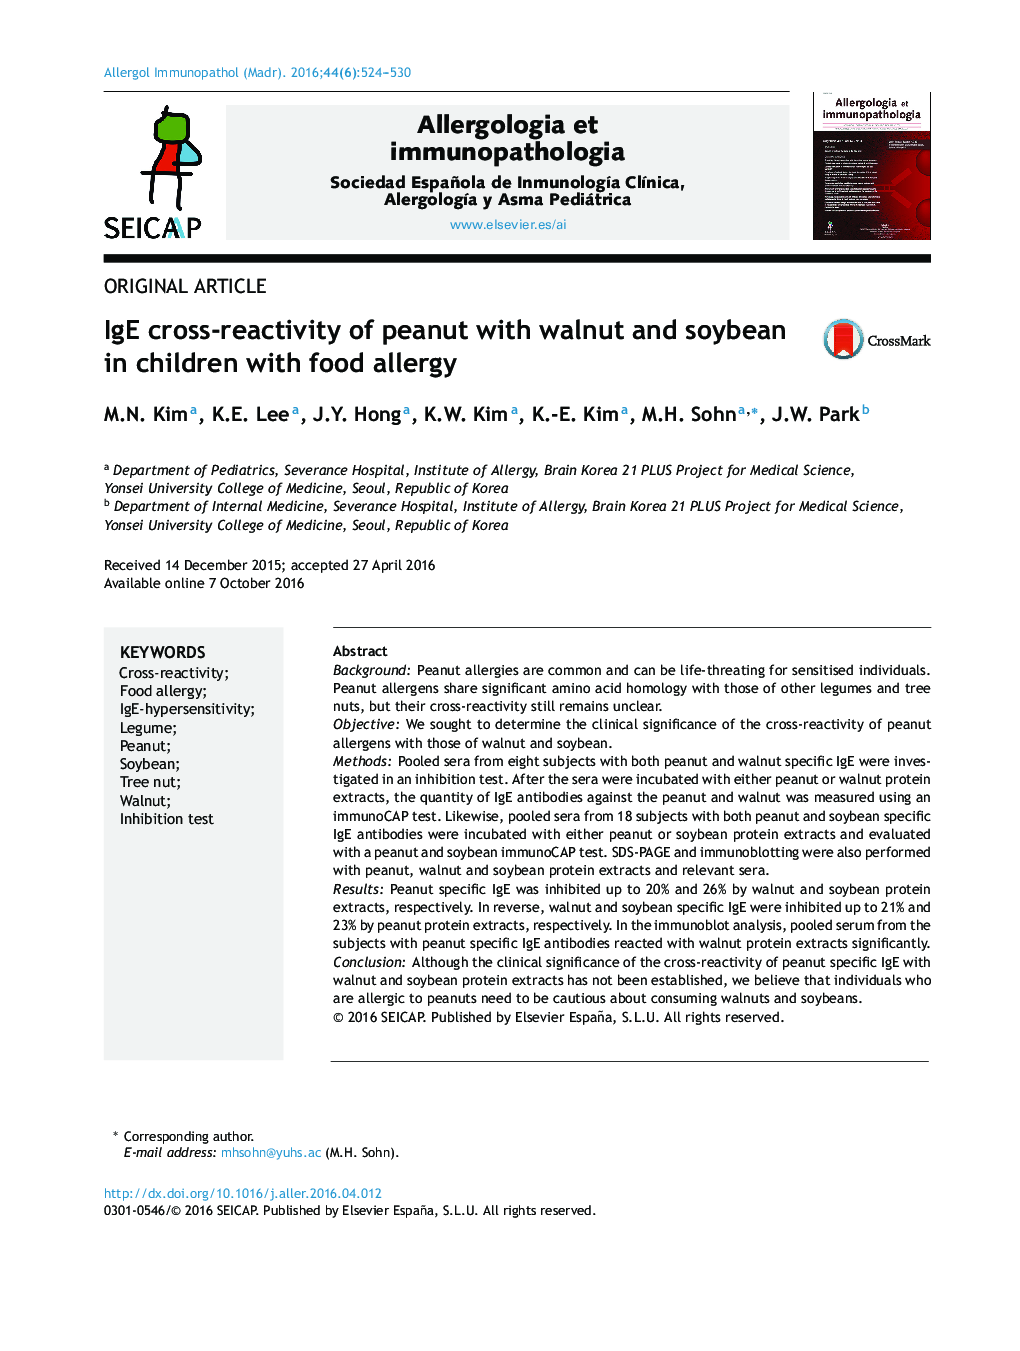 IgE cross-reactivity of peanut with walnut and soybean in children with food allergy